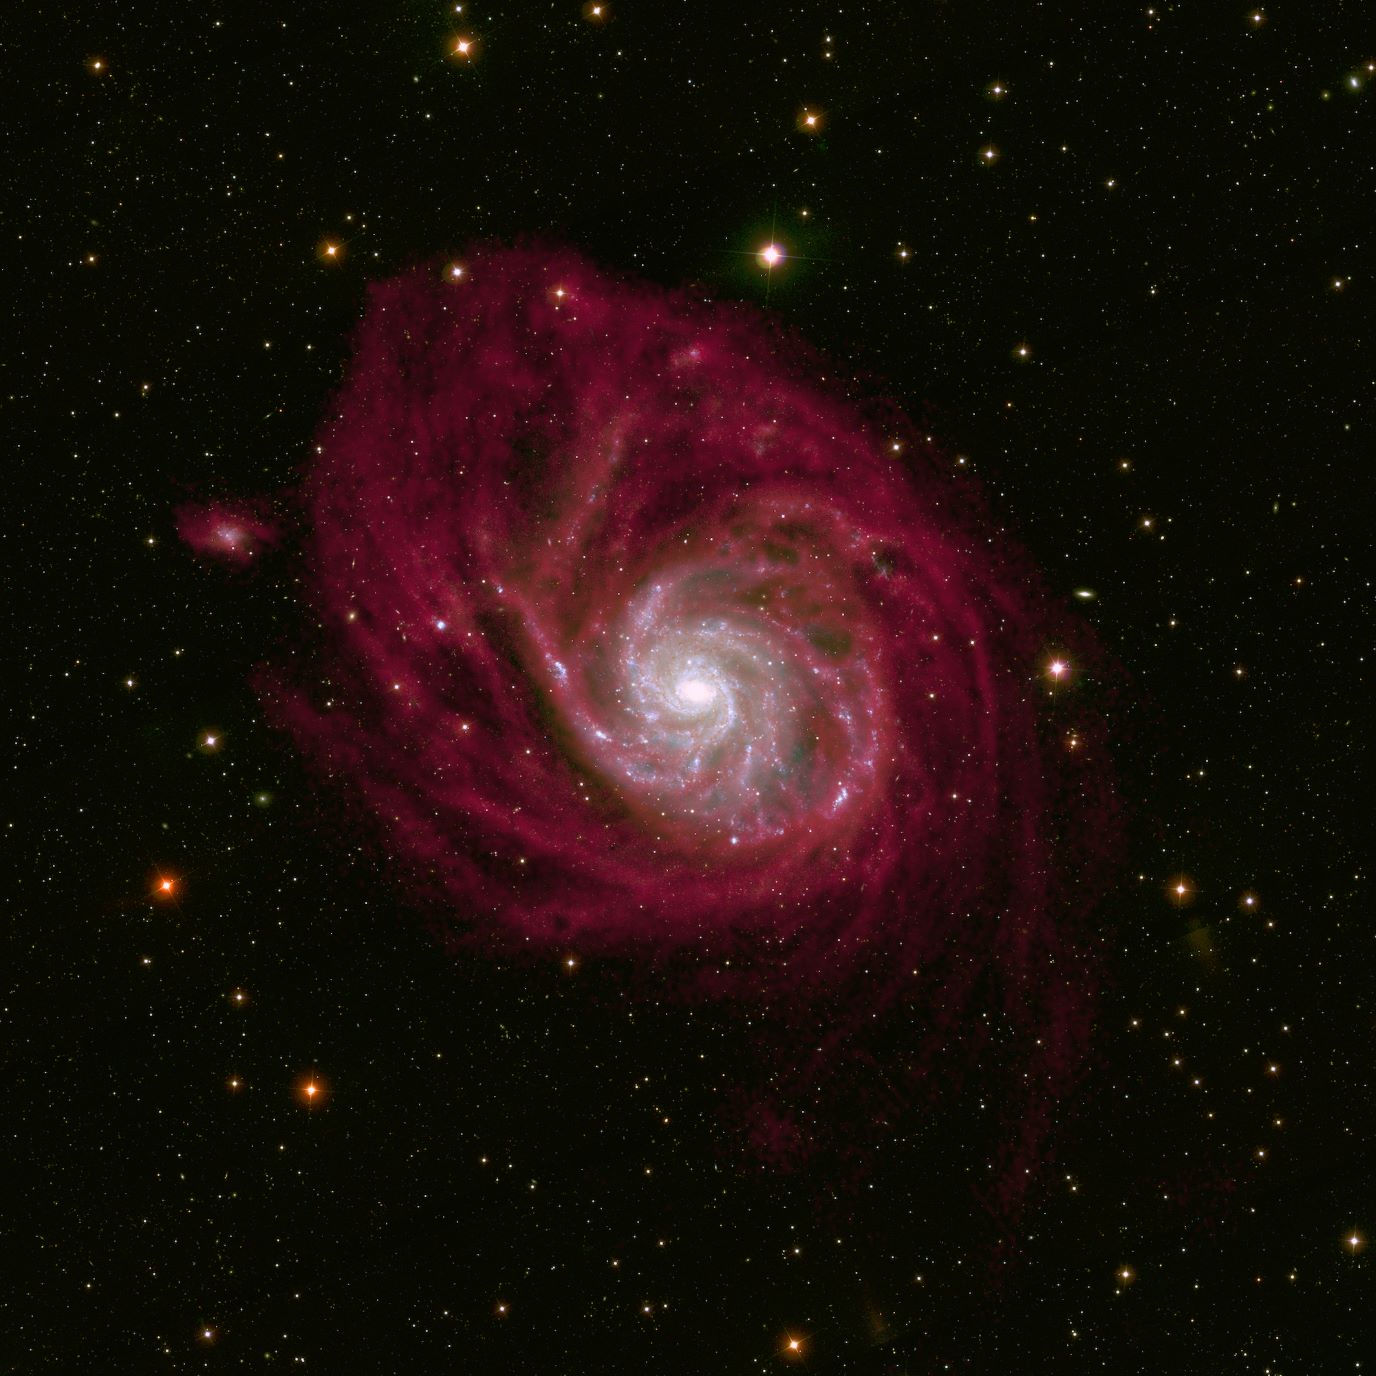 The nearby galaxy M101 being studied in this project